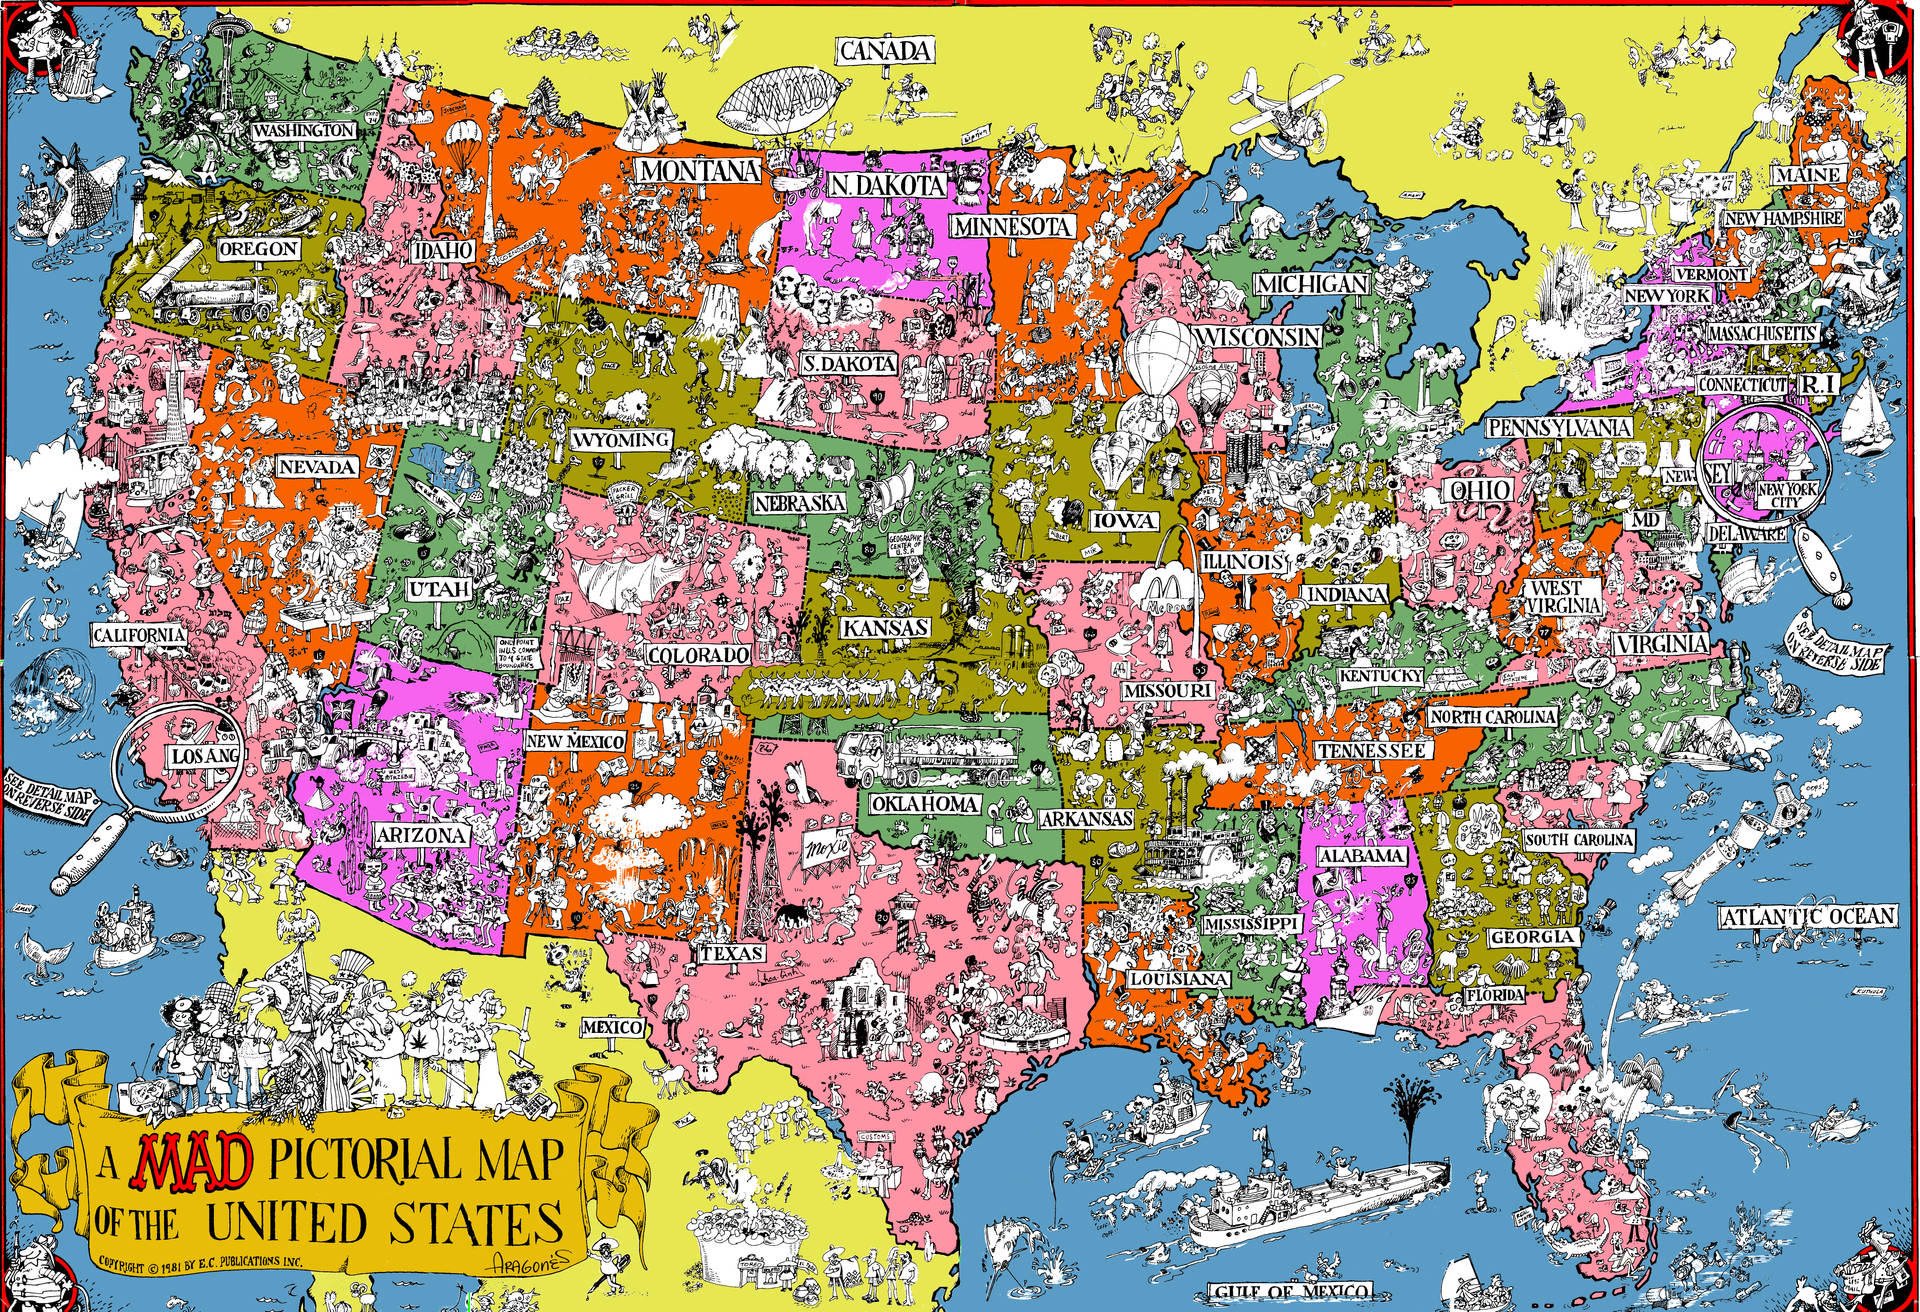 United States Mad Pictorial Map Wallpaper